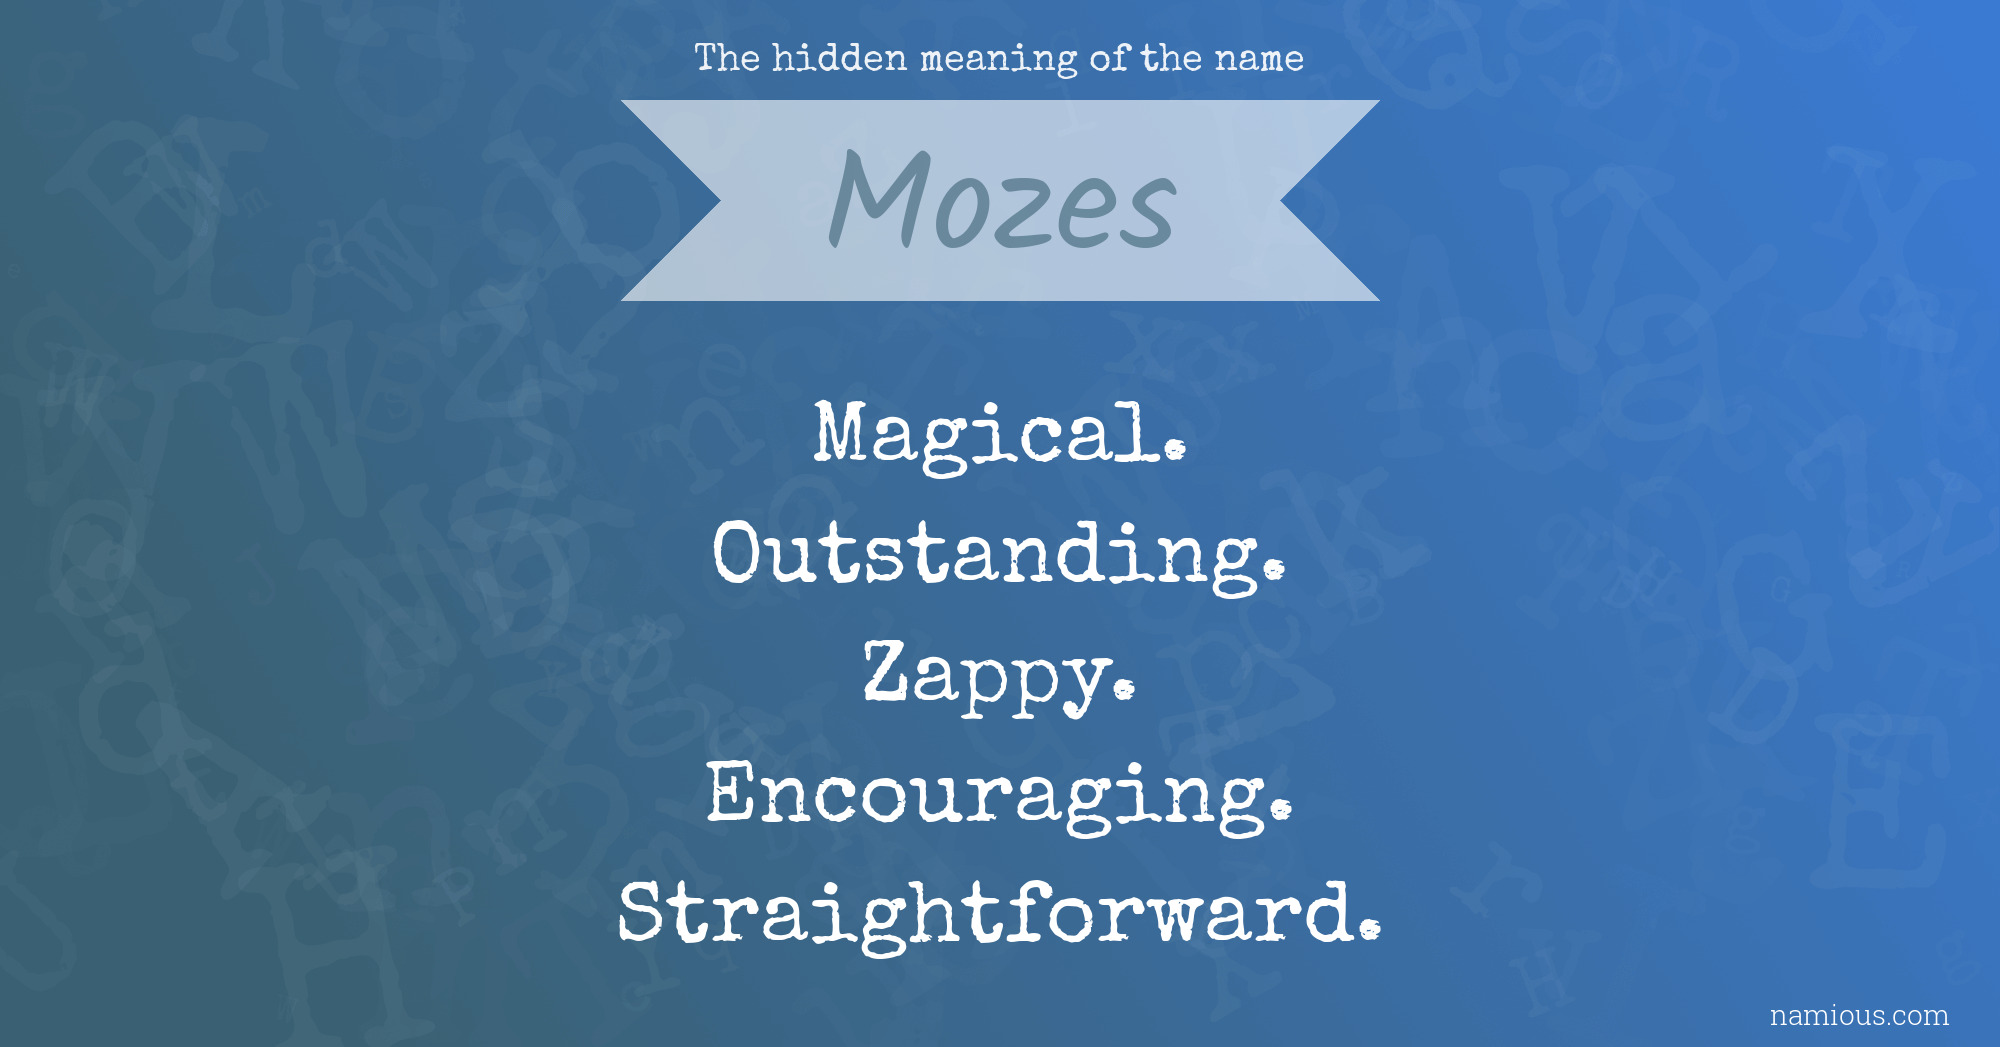 The hidden meaning of the name Mozes